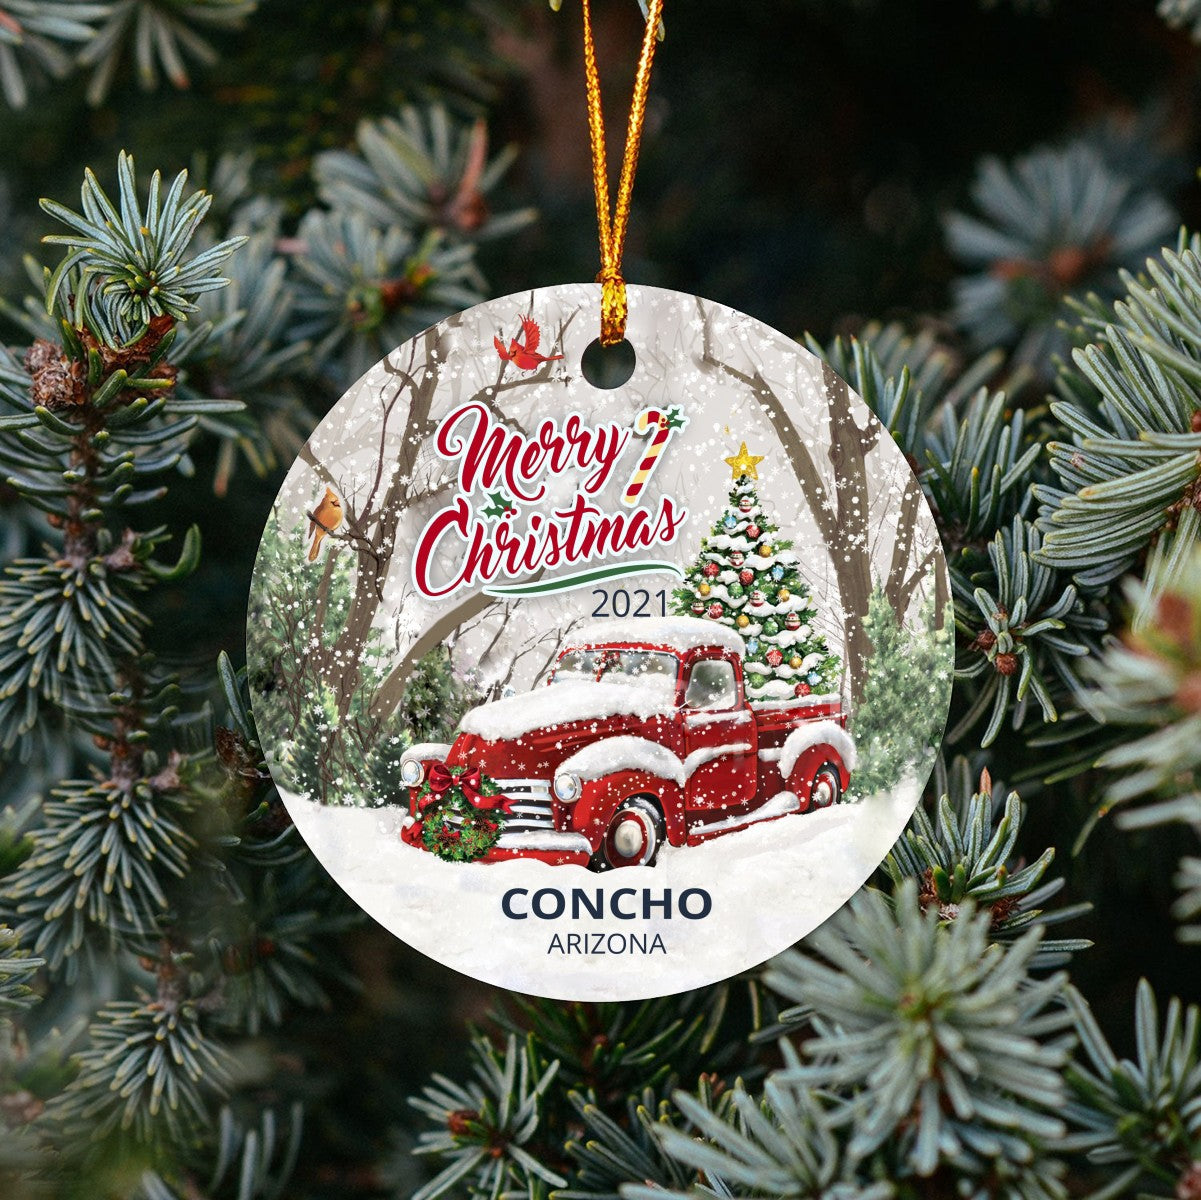 Christmas Tree Ornaments Concho - Ornament Customize With Name City And State Concho Arizona AZ - Red Truck Xmas Ornaments 3'' Plastic Gift For Family, Friend And Housewarming